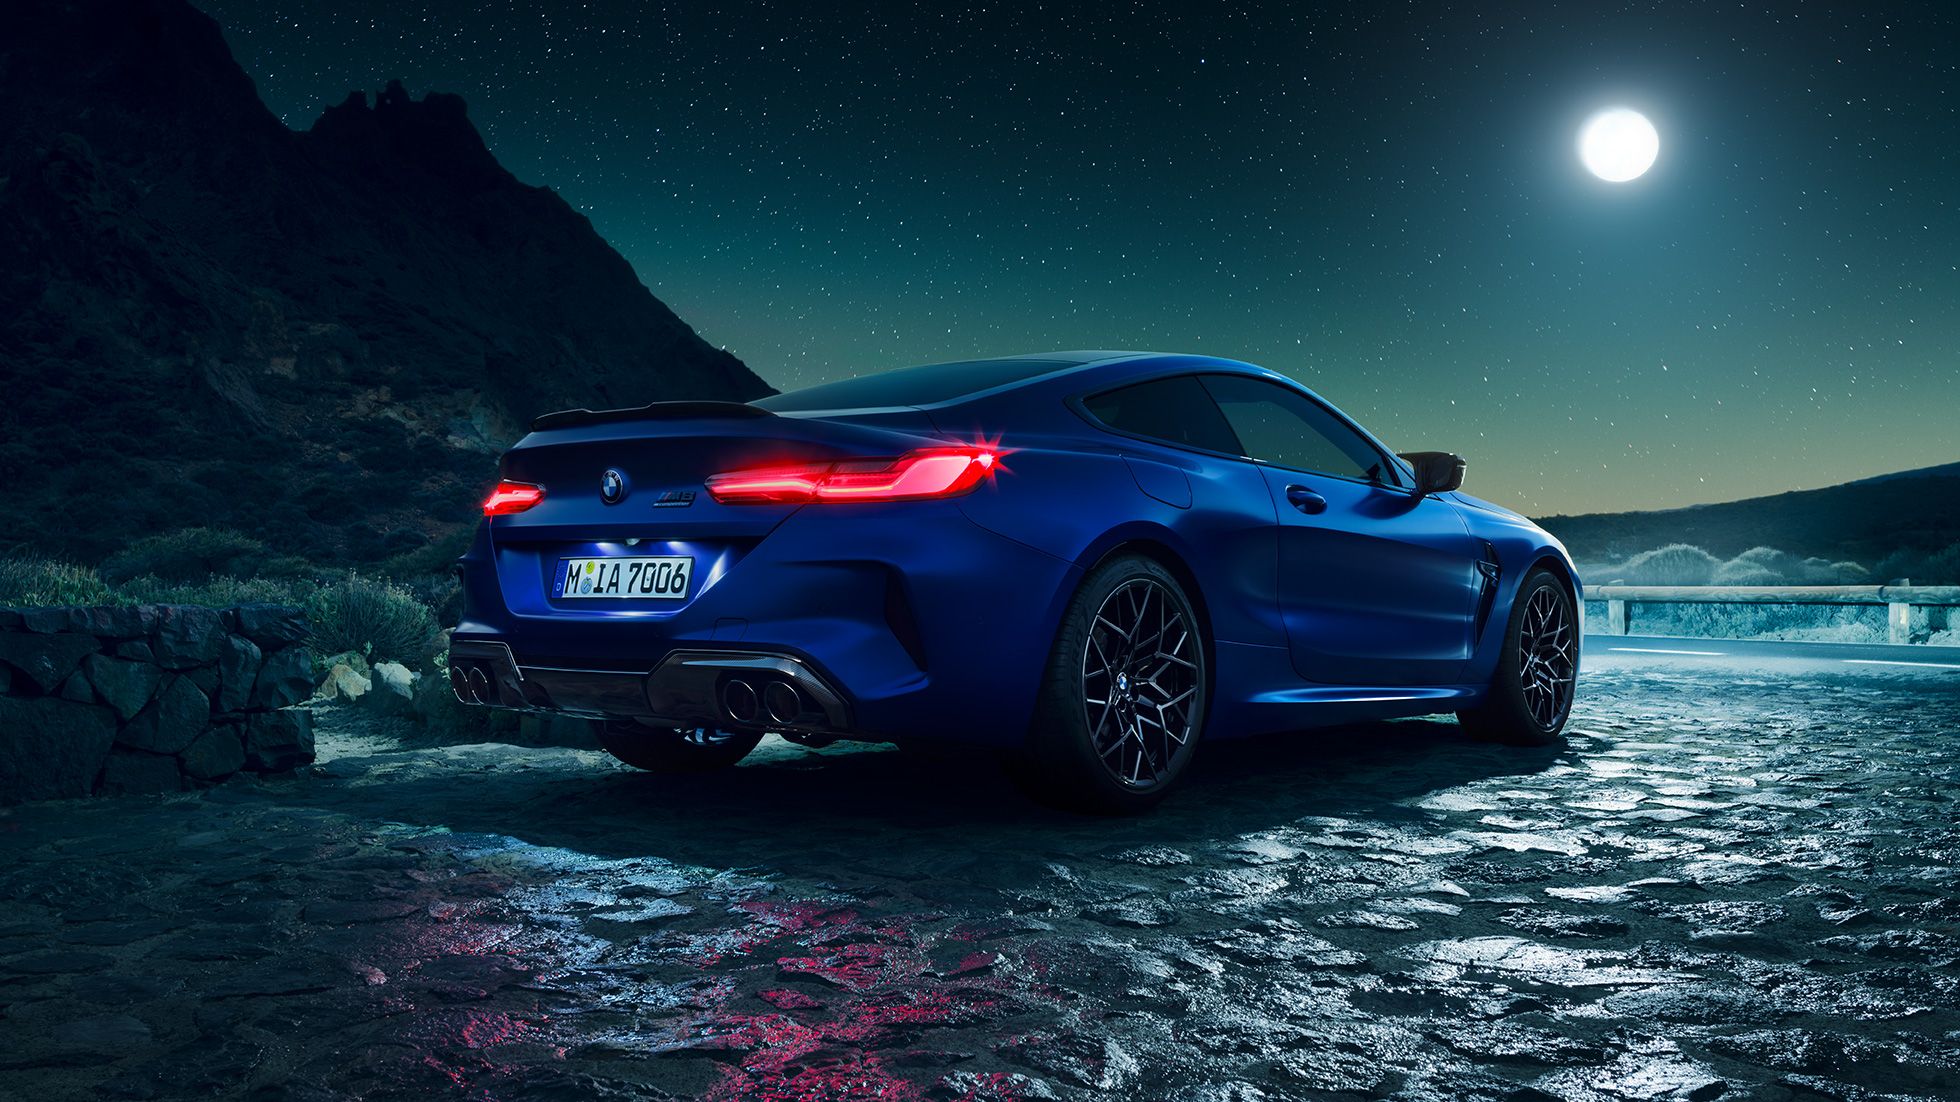 2019 BMW M8 Competition, blue, night sky and full moon, BMW